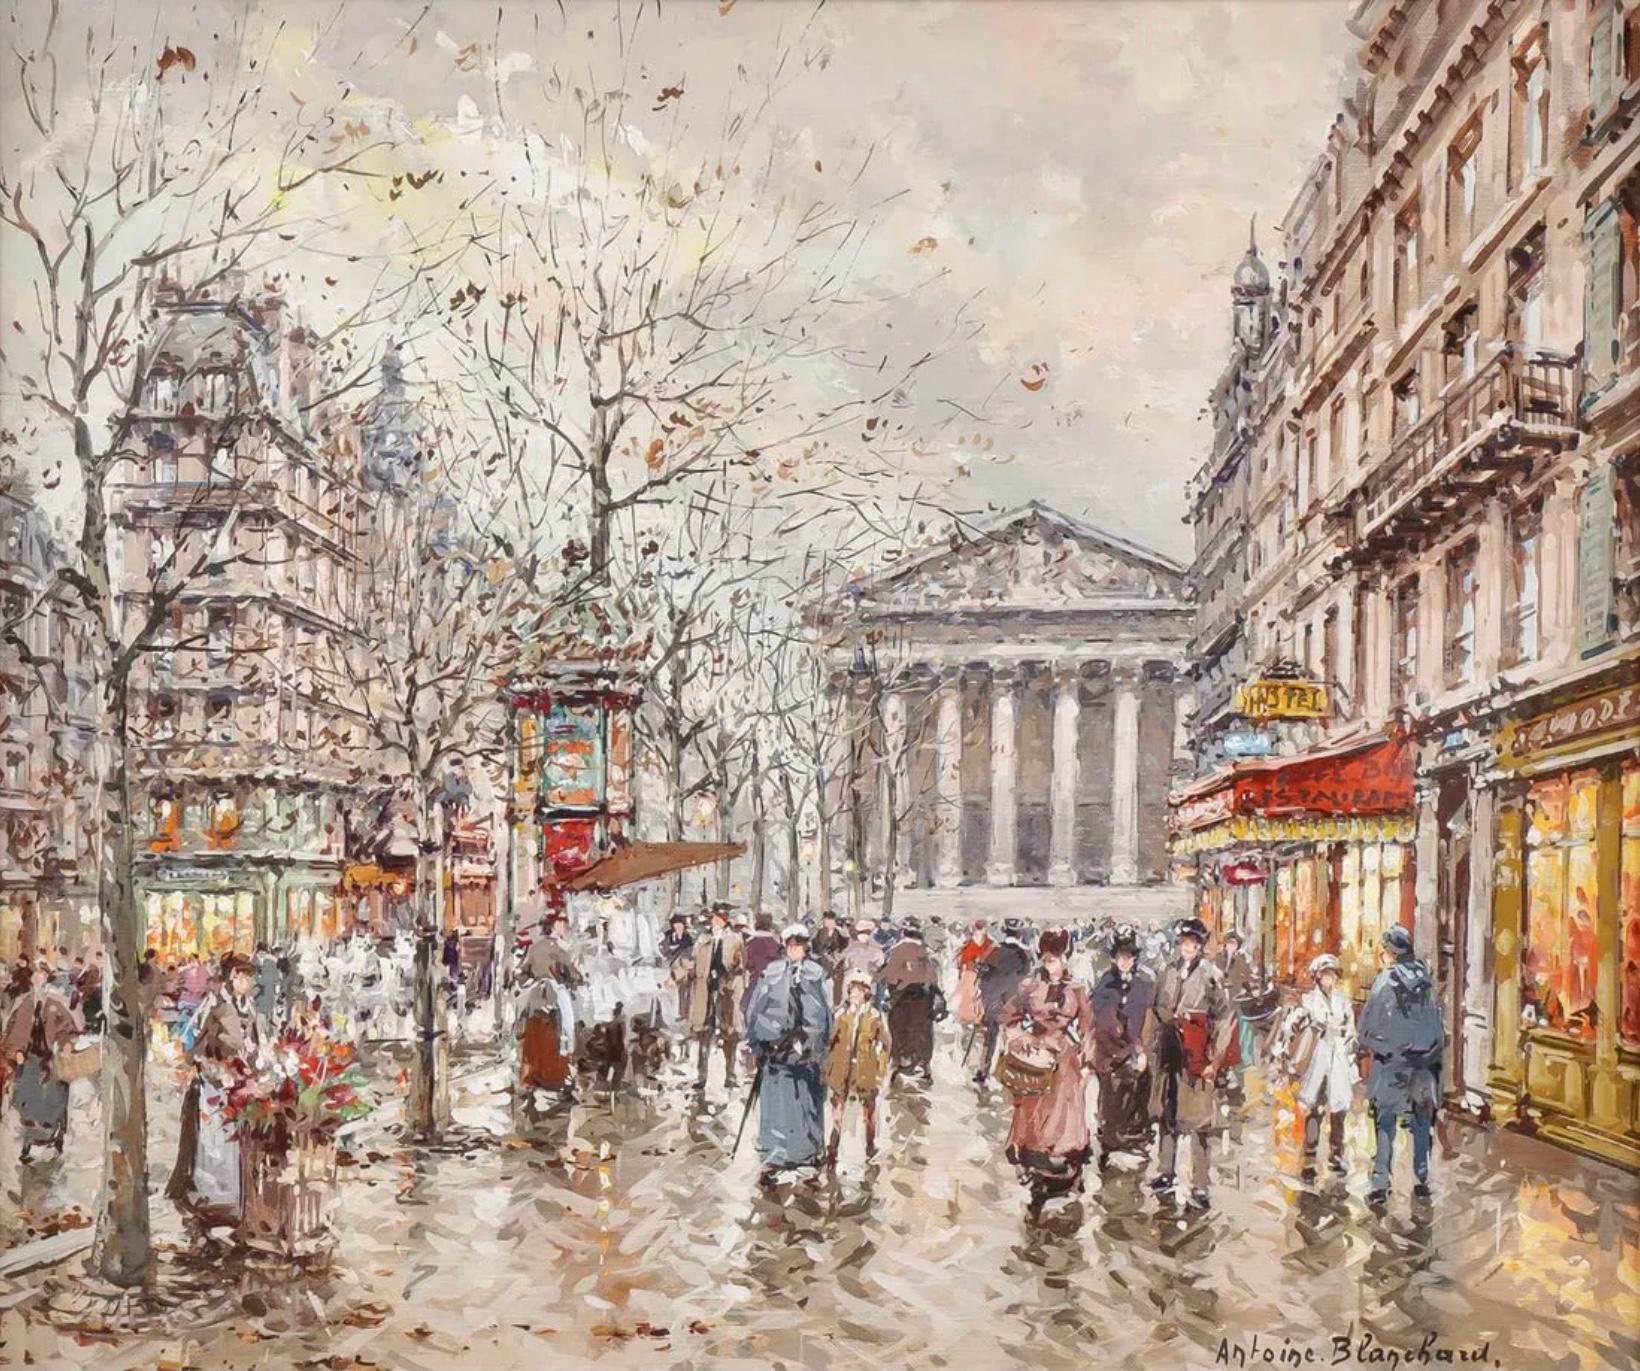 ANTOINE BLANCHARD (French 1910 - 1988)
La Rue Tronchet et la Madeleine 
Oil on canvas 
Circa 1980
Signed lower right and signed and titled on verso 
18 x 21.5 inches (47 x 54.5cm) 

A COA (Certificate of Authenticity) by REHs Galleries will